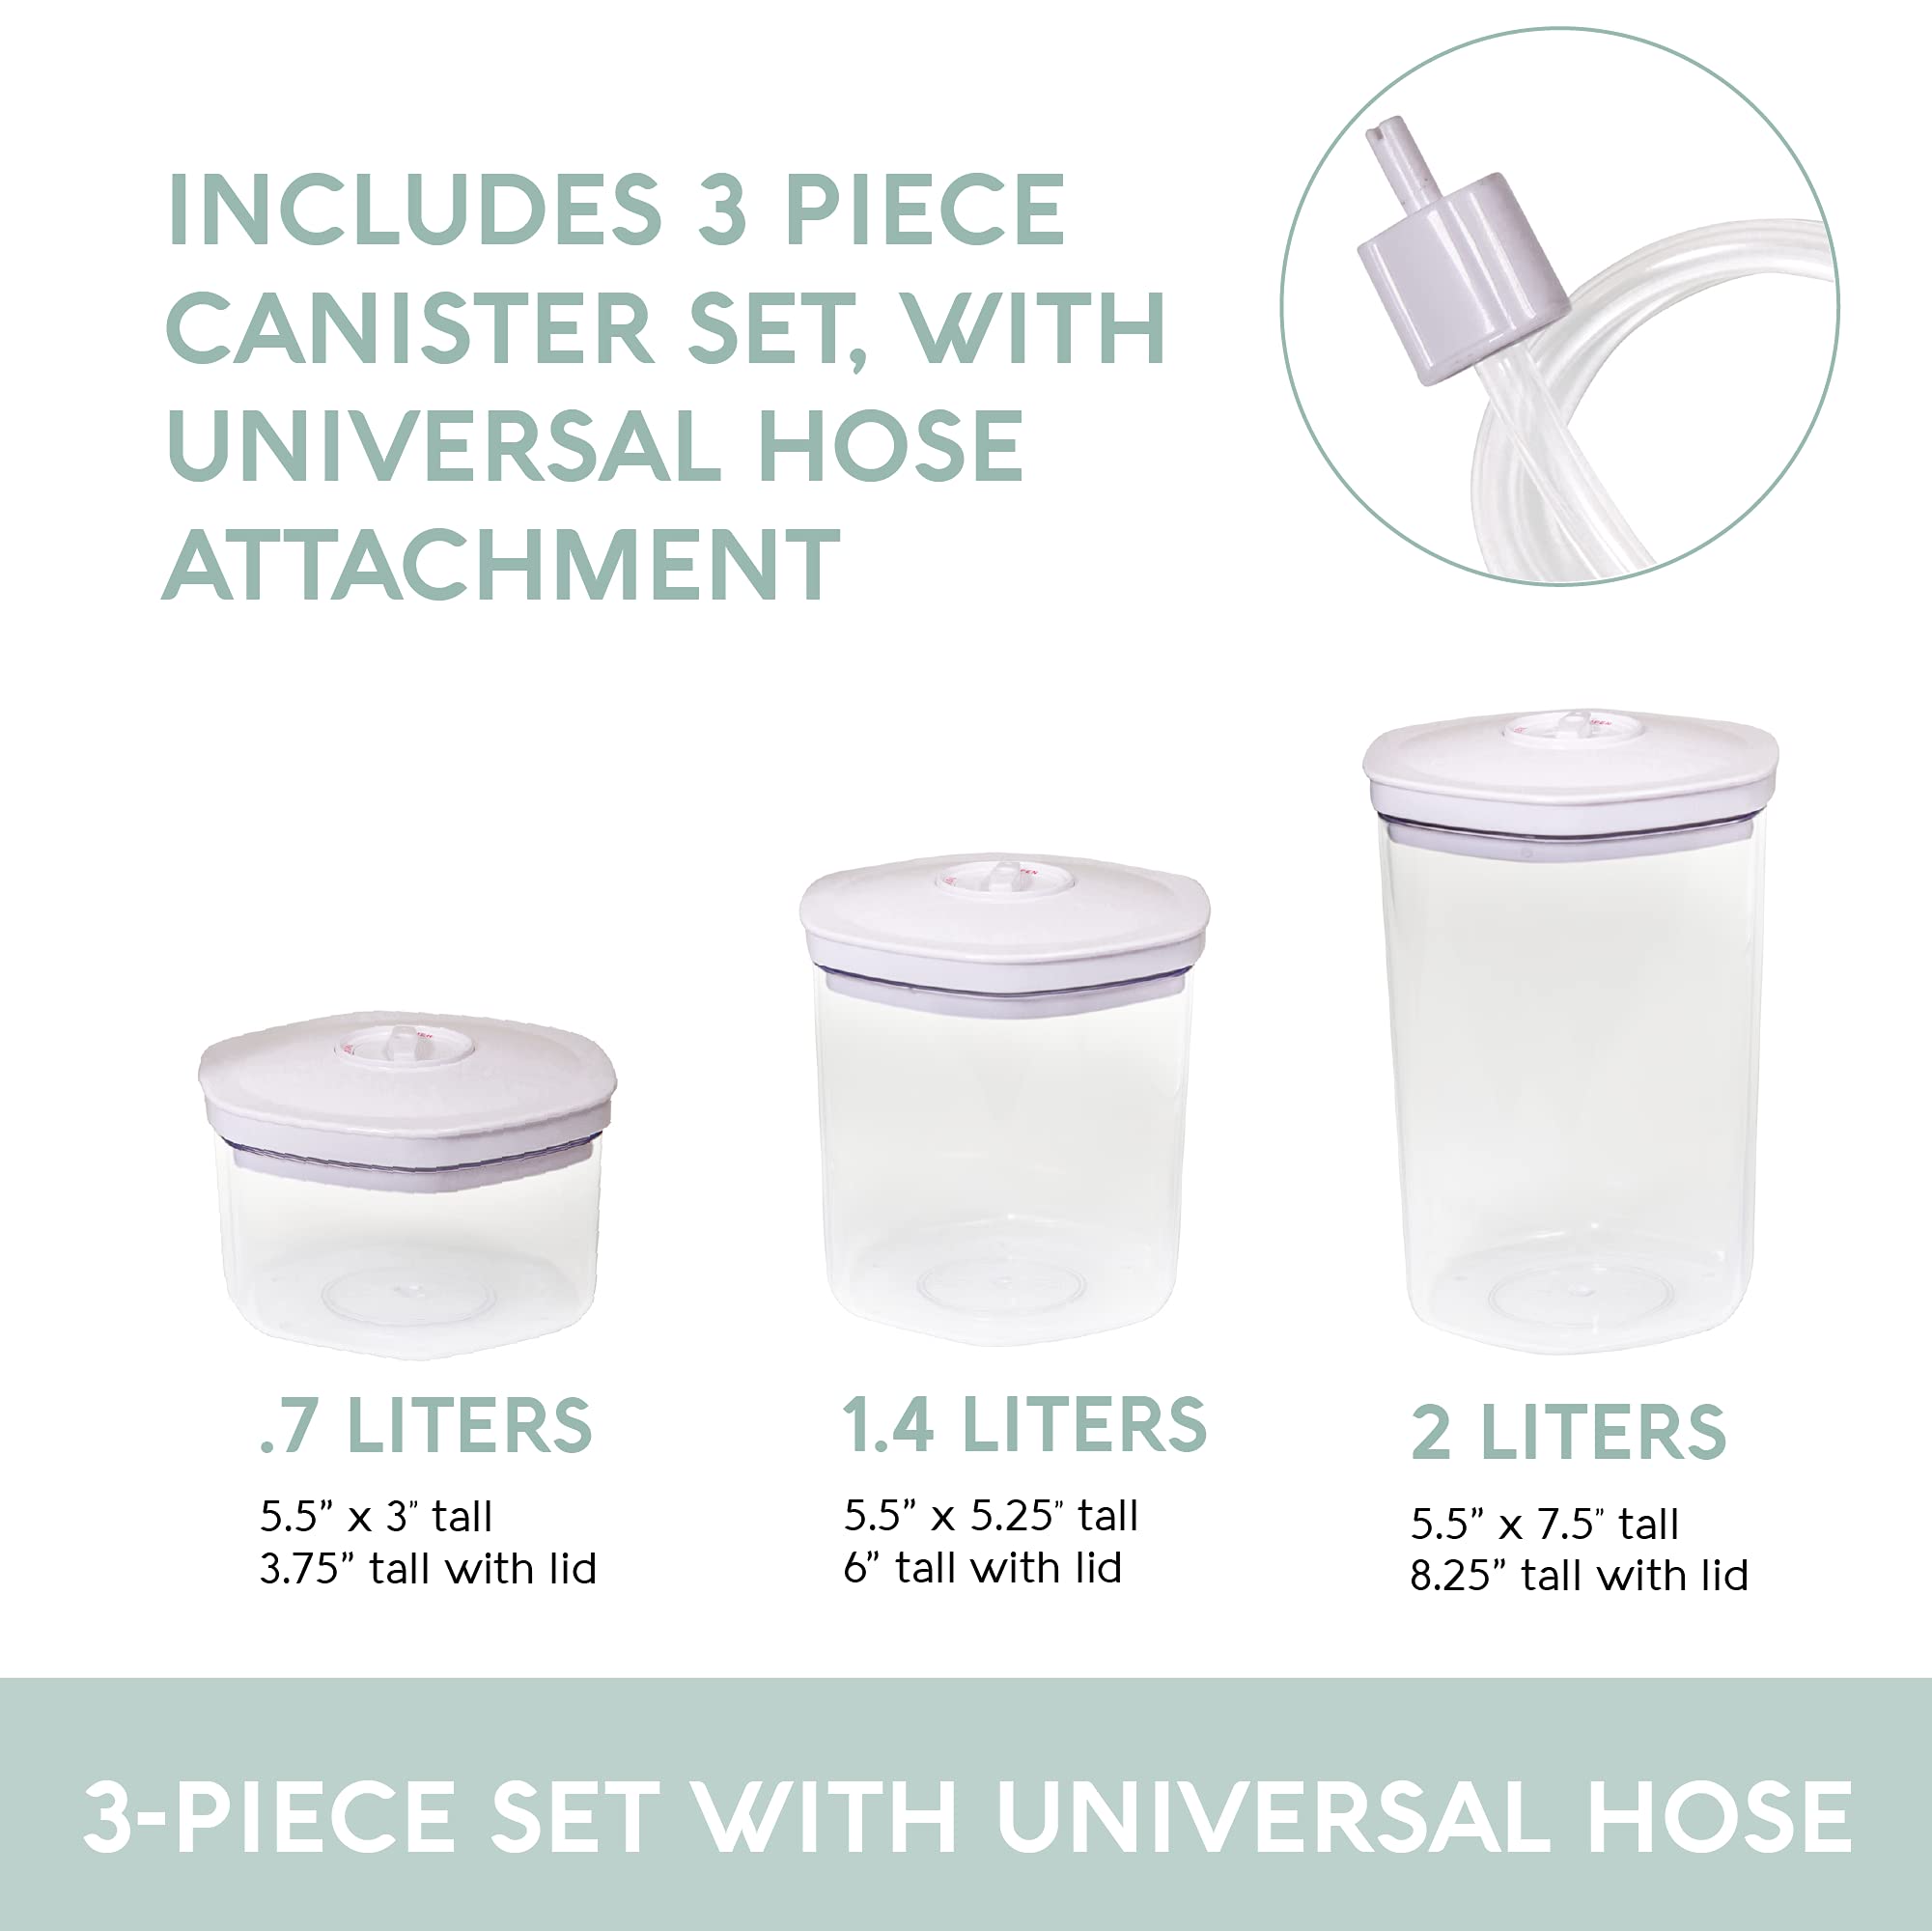 Avid Armor Vacuum Food Containers 3 Piece Set for Home Kitchen, Coffee Drinkers, Pasta Lovers Keep Your Food Fresh Cannister Sizes: 2L, 1.4L, and 0.7L Complete with Accessory Hose. BPA Free.